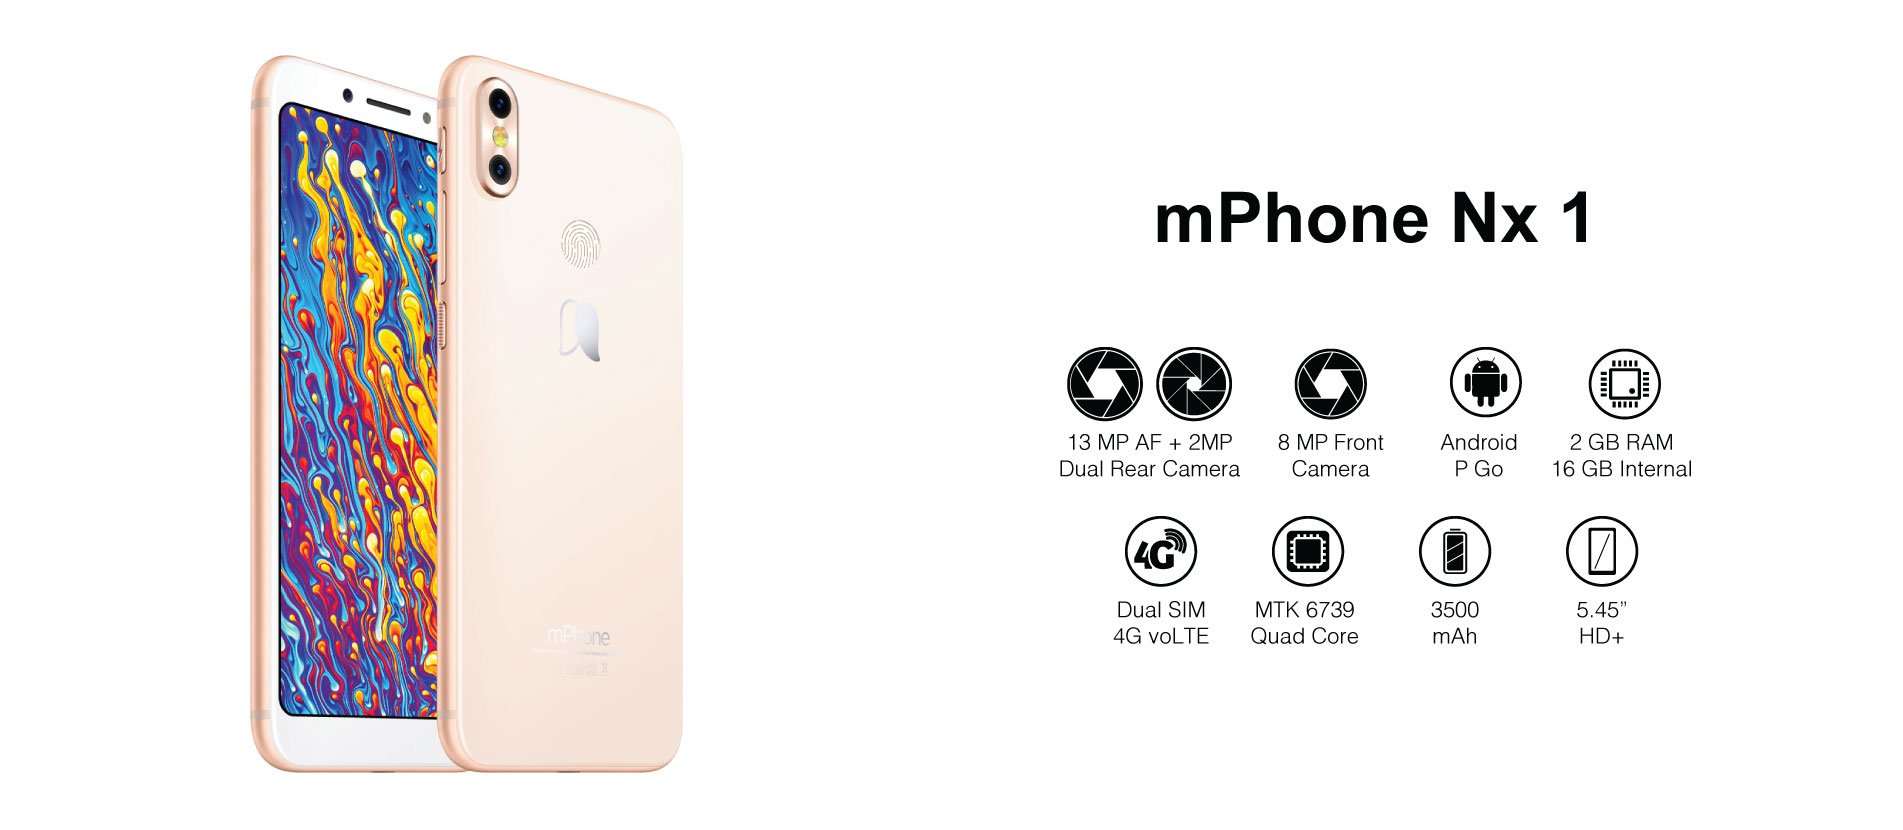 mPhone NX 1 | Android P Go | 4G Network